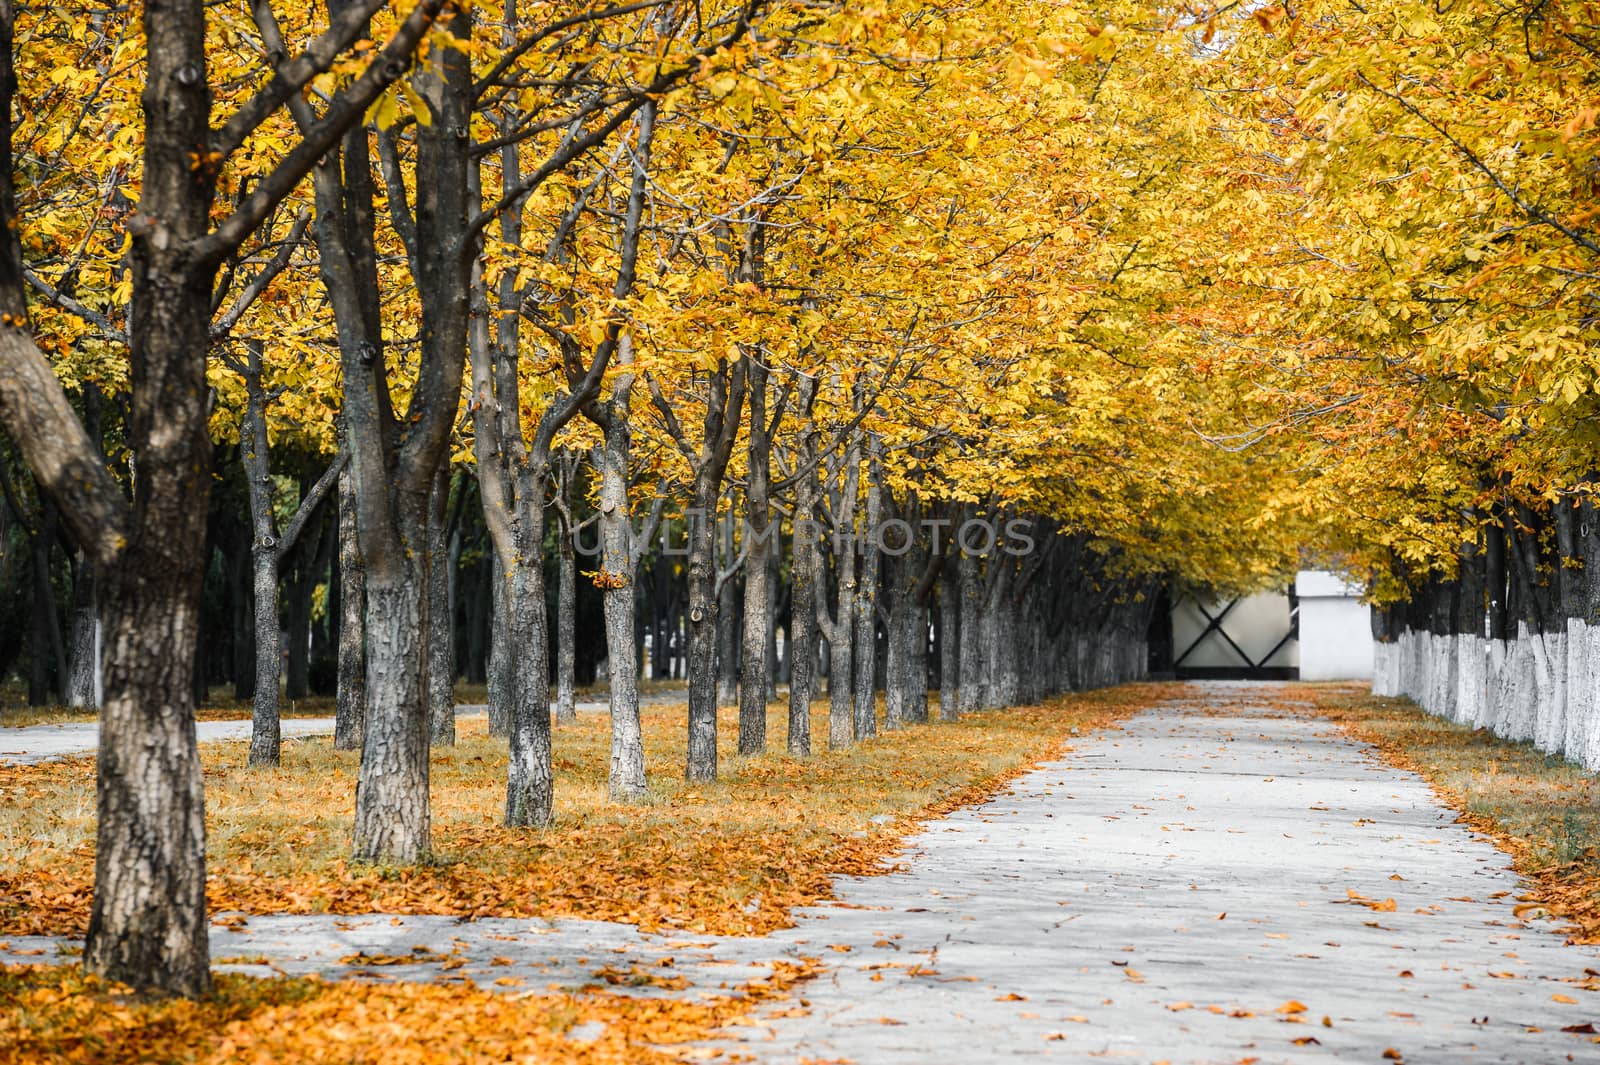 Autumn park alley with yellow leaves on trees